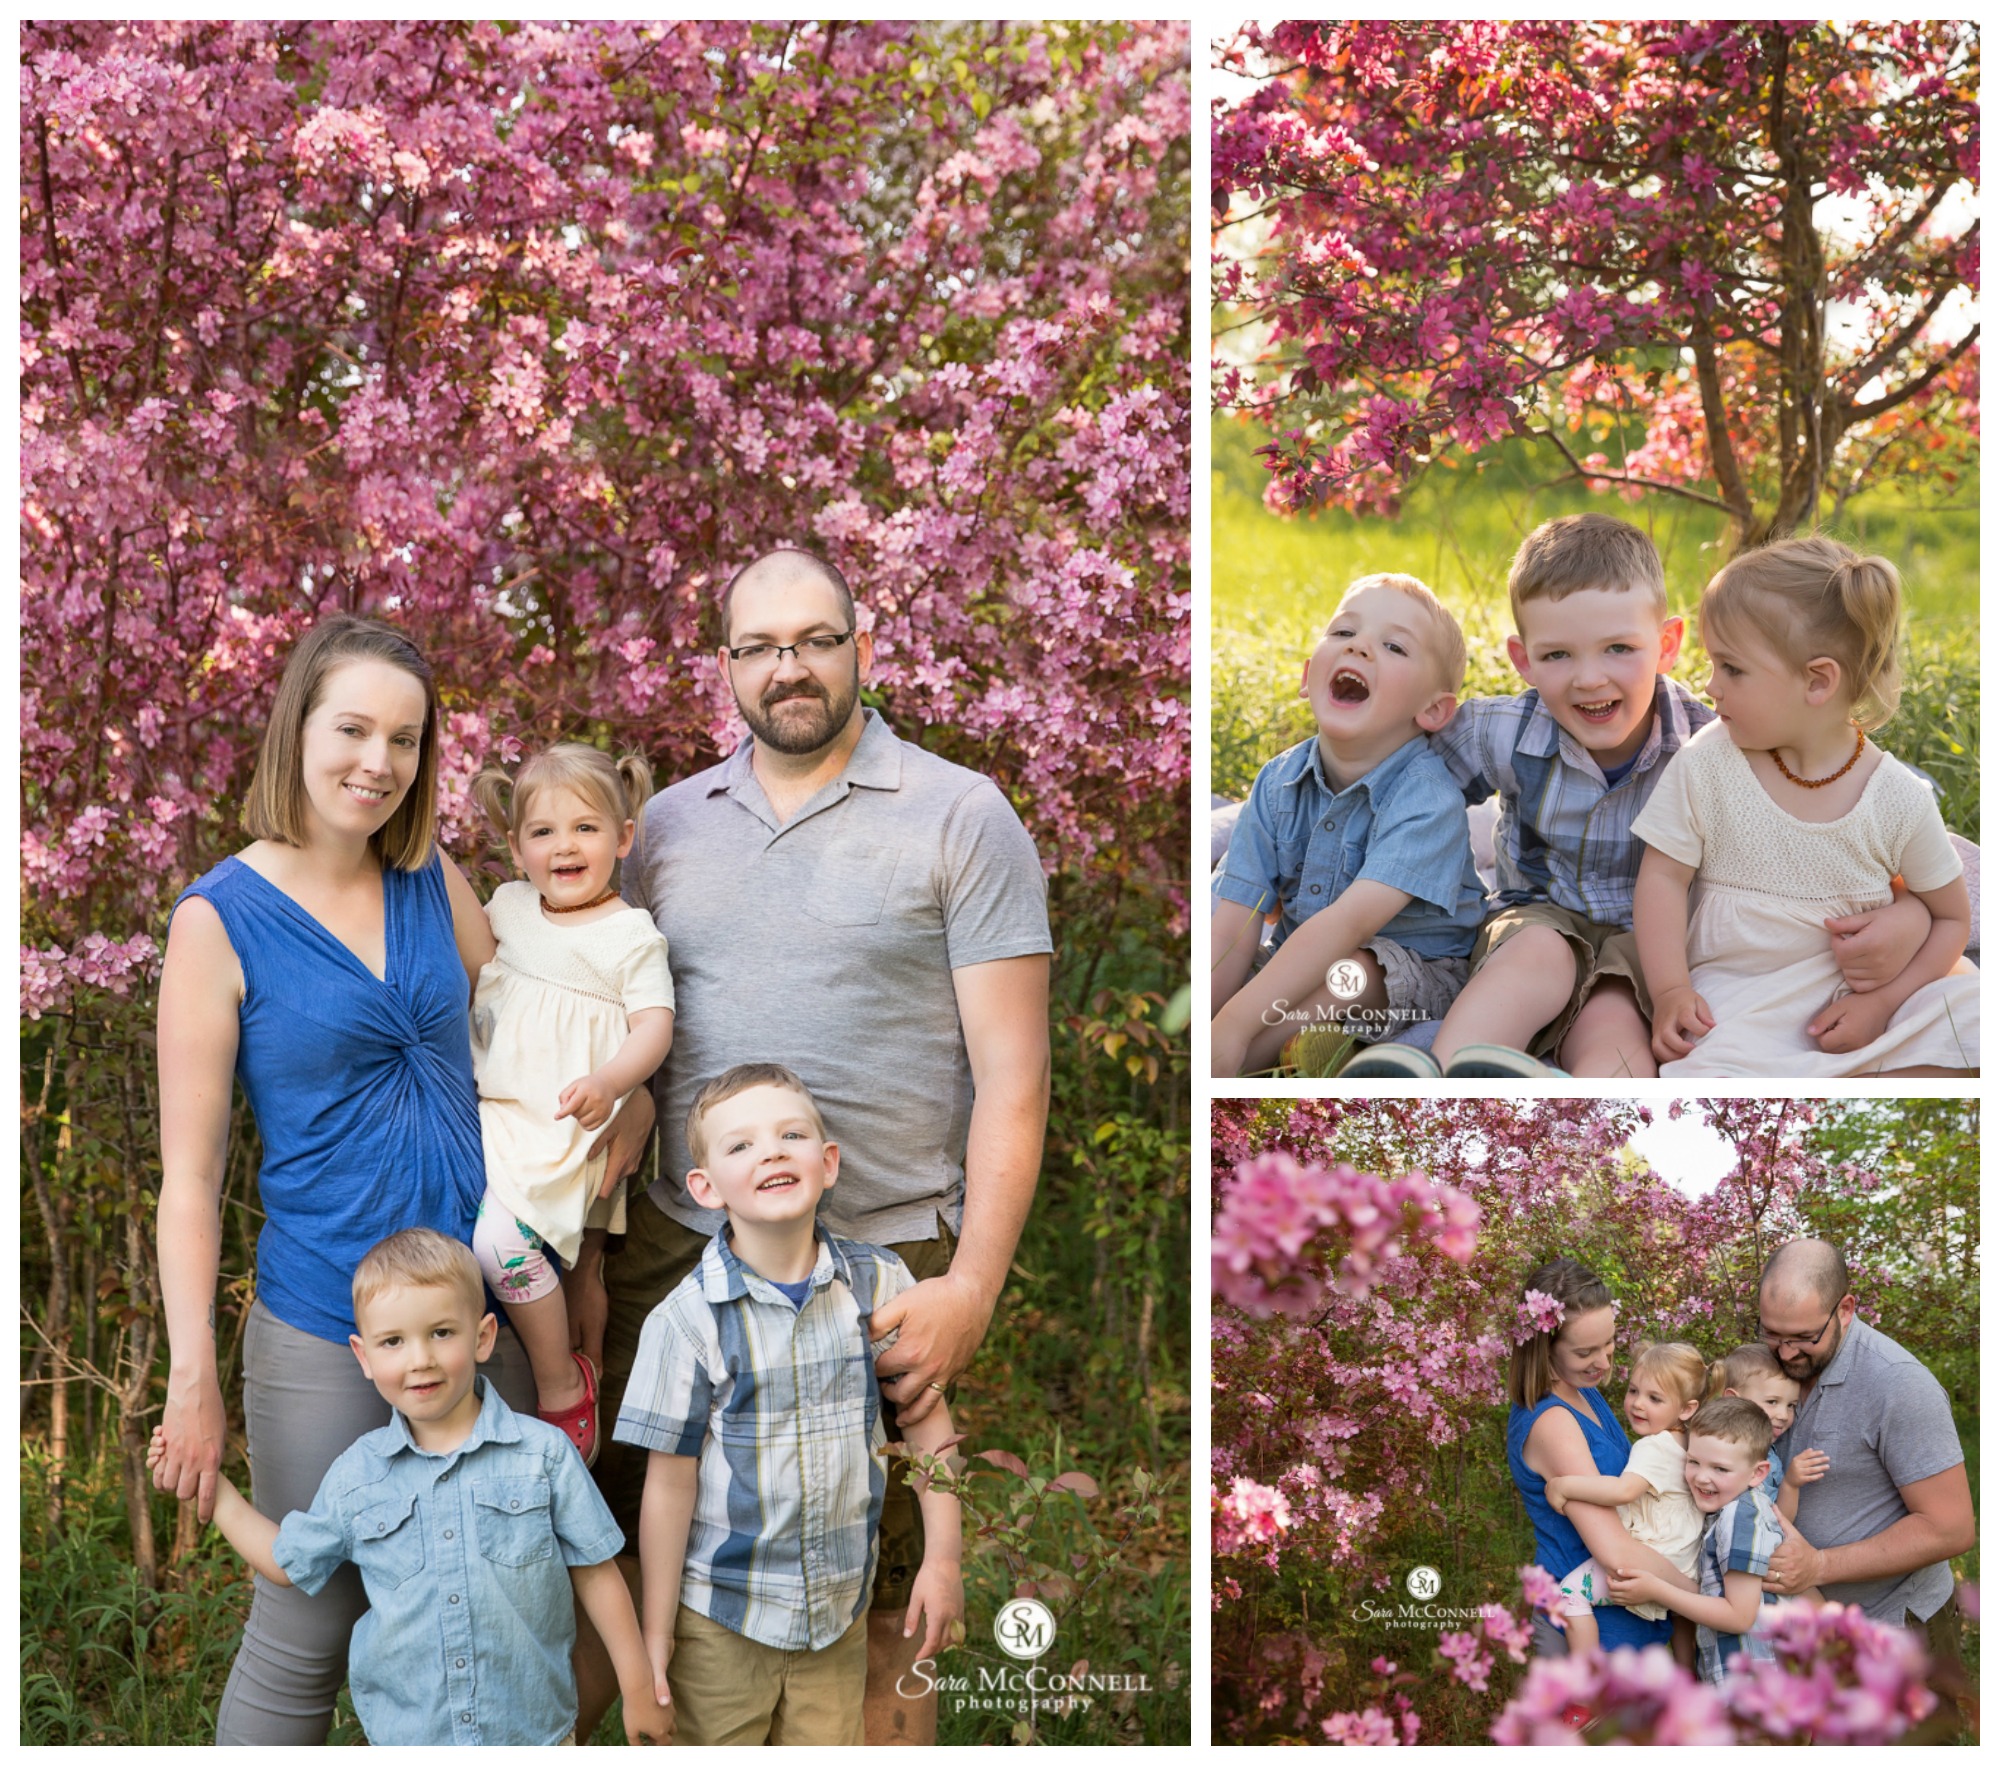 Ottawa Spring Blossom Photo Sessions by Sara McConnell Photography